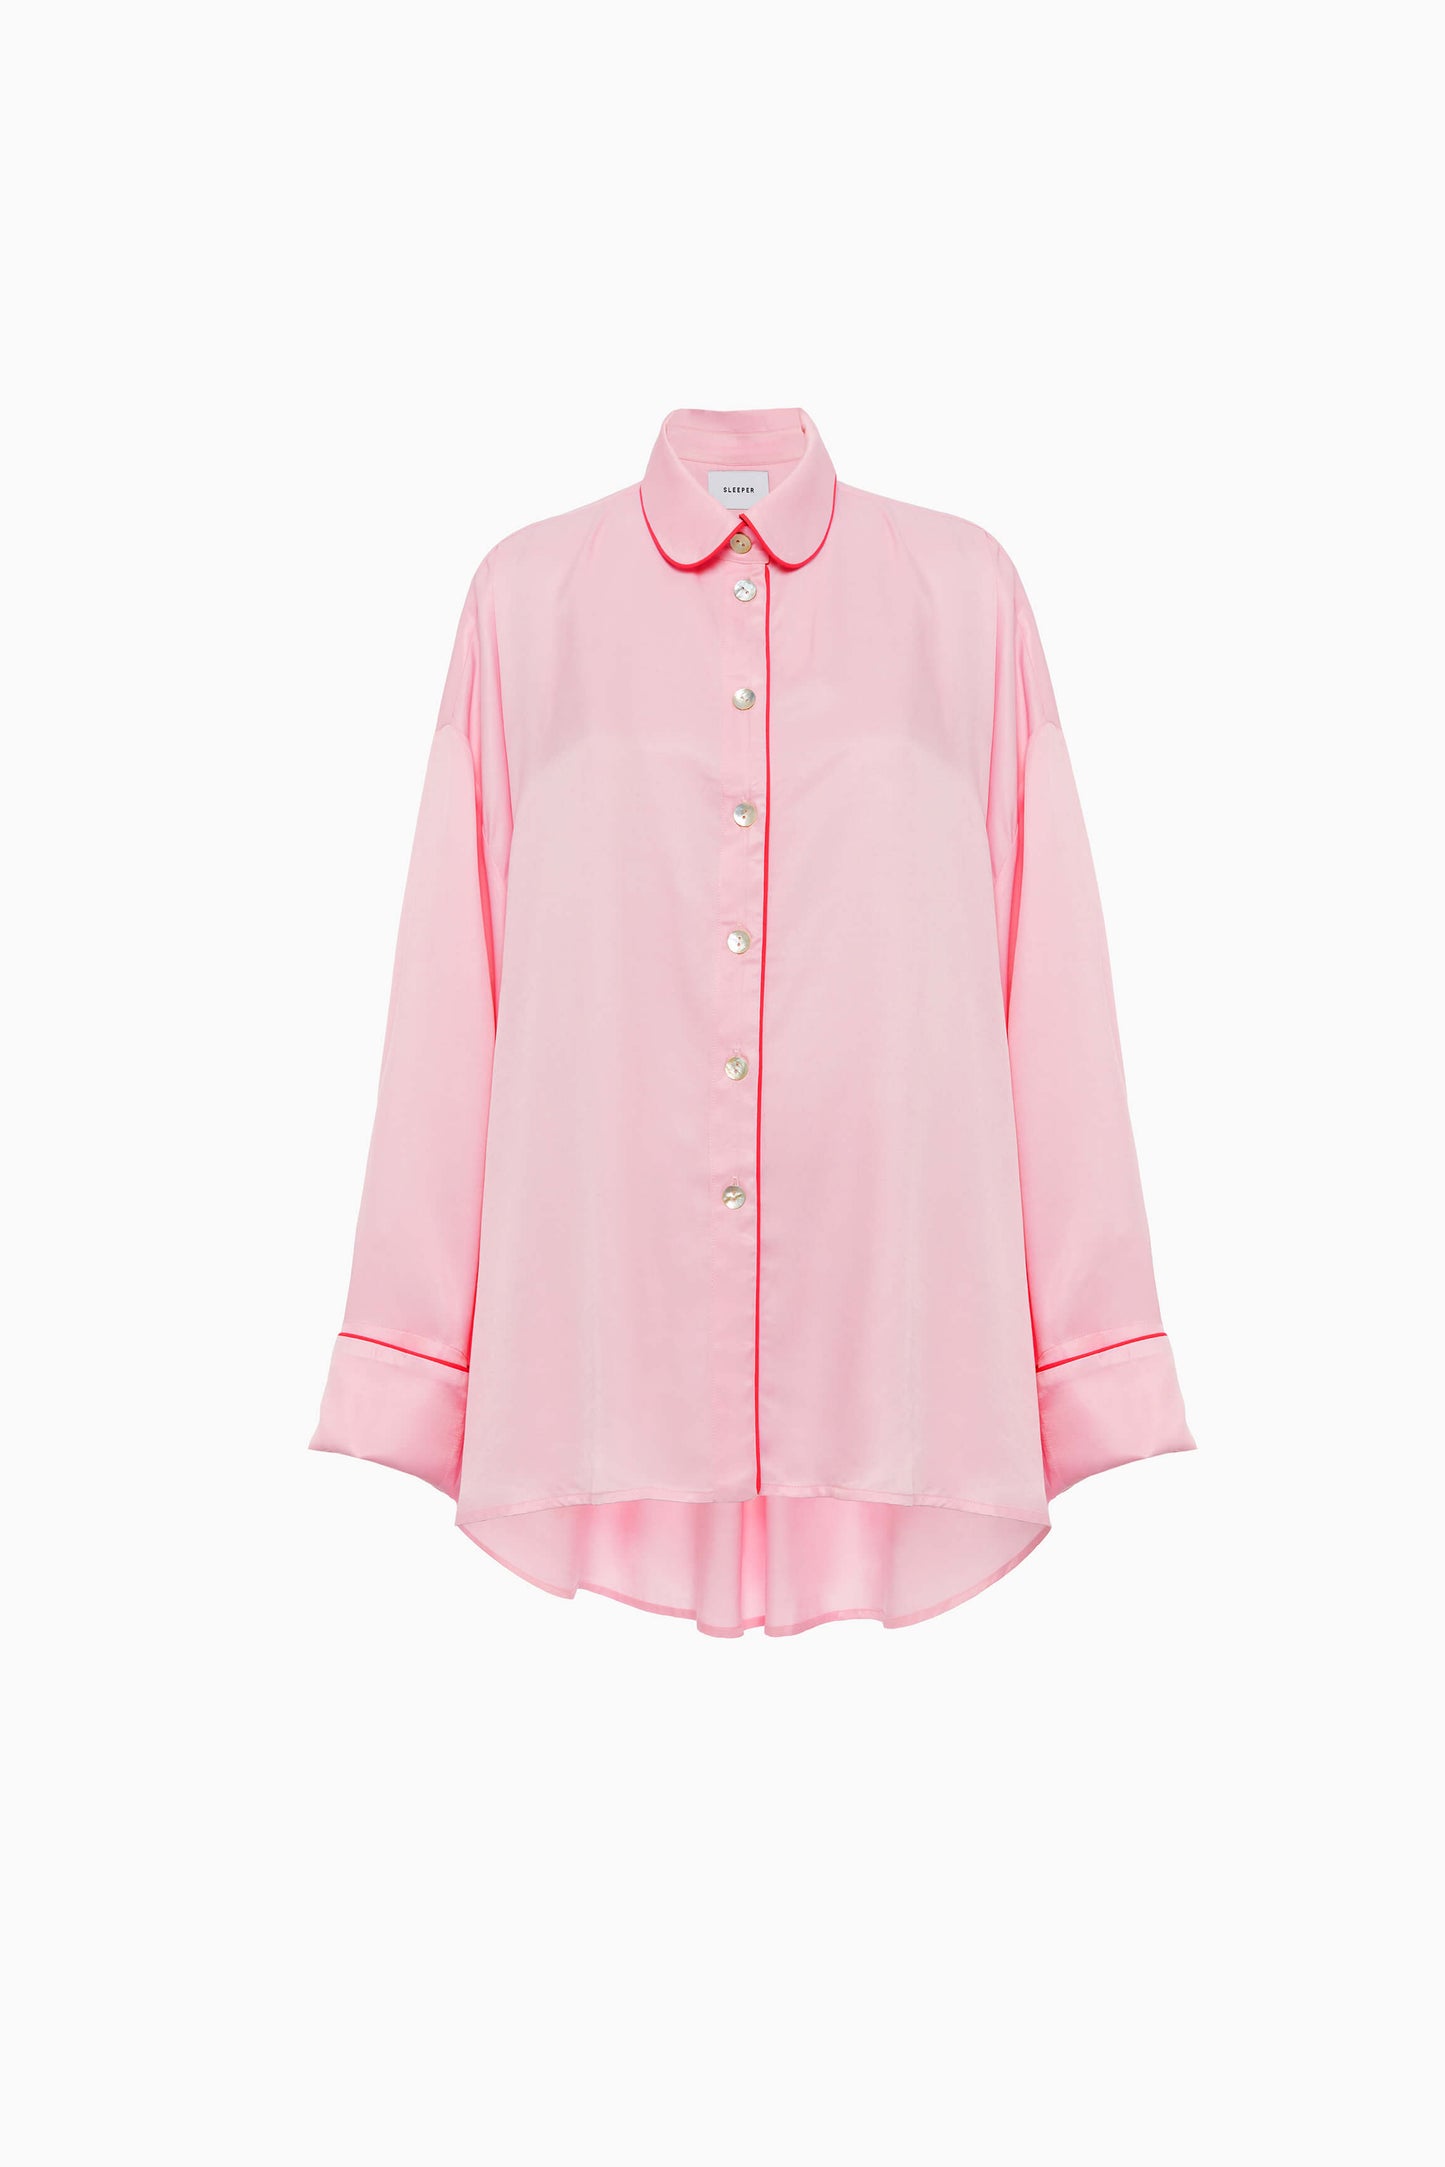 Pastelle Oversized Shirt in Pink